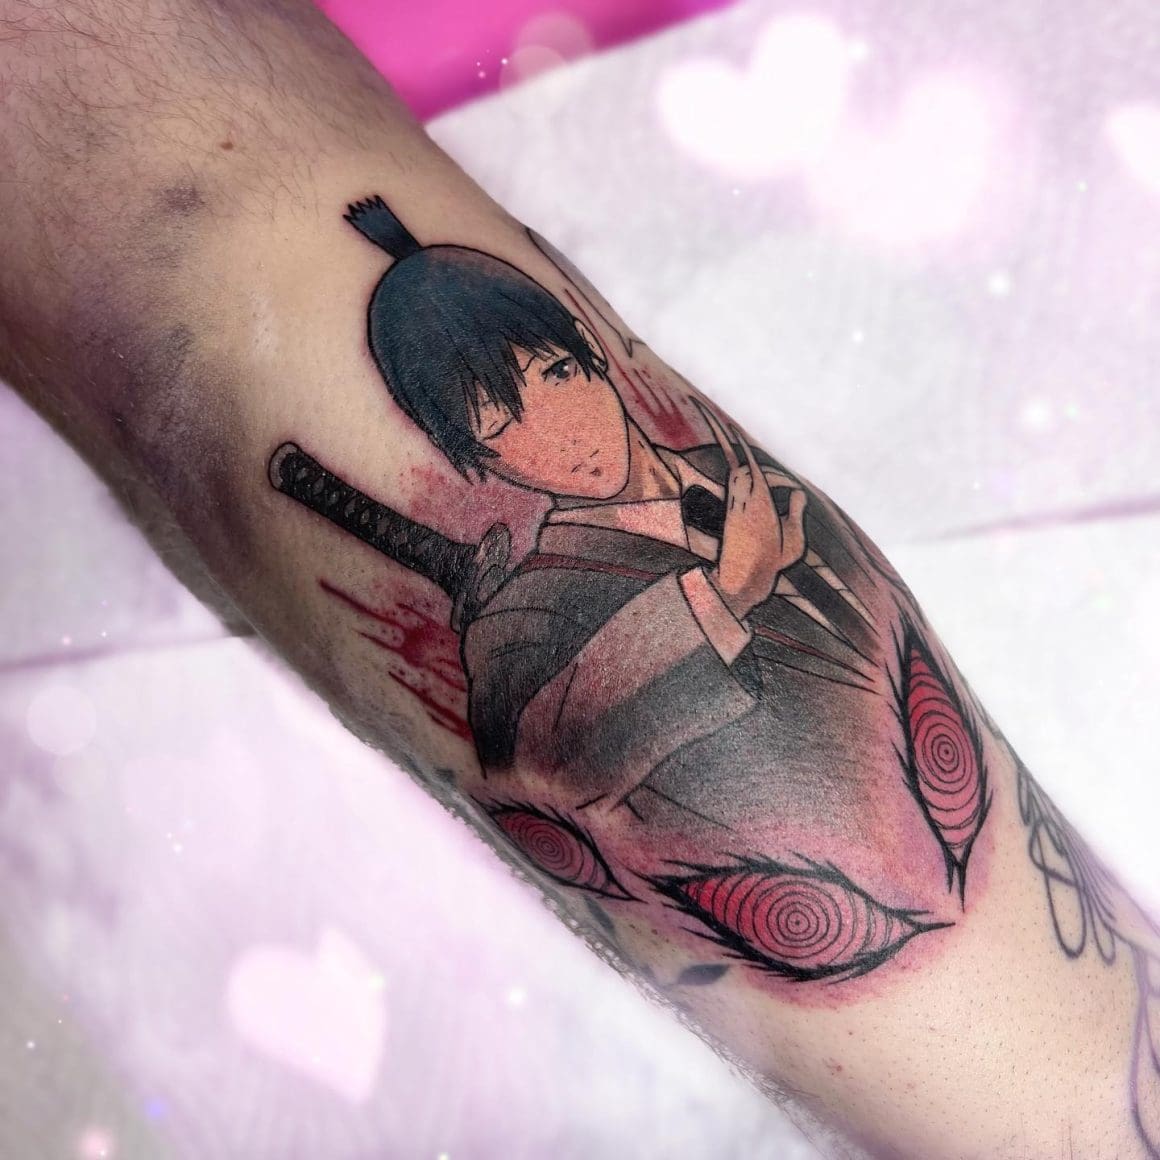 Chainsaw Man Tattoos: Unleashing the Devil Within